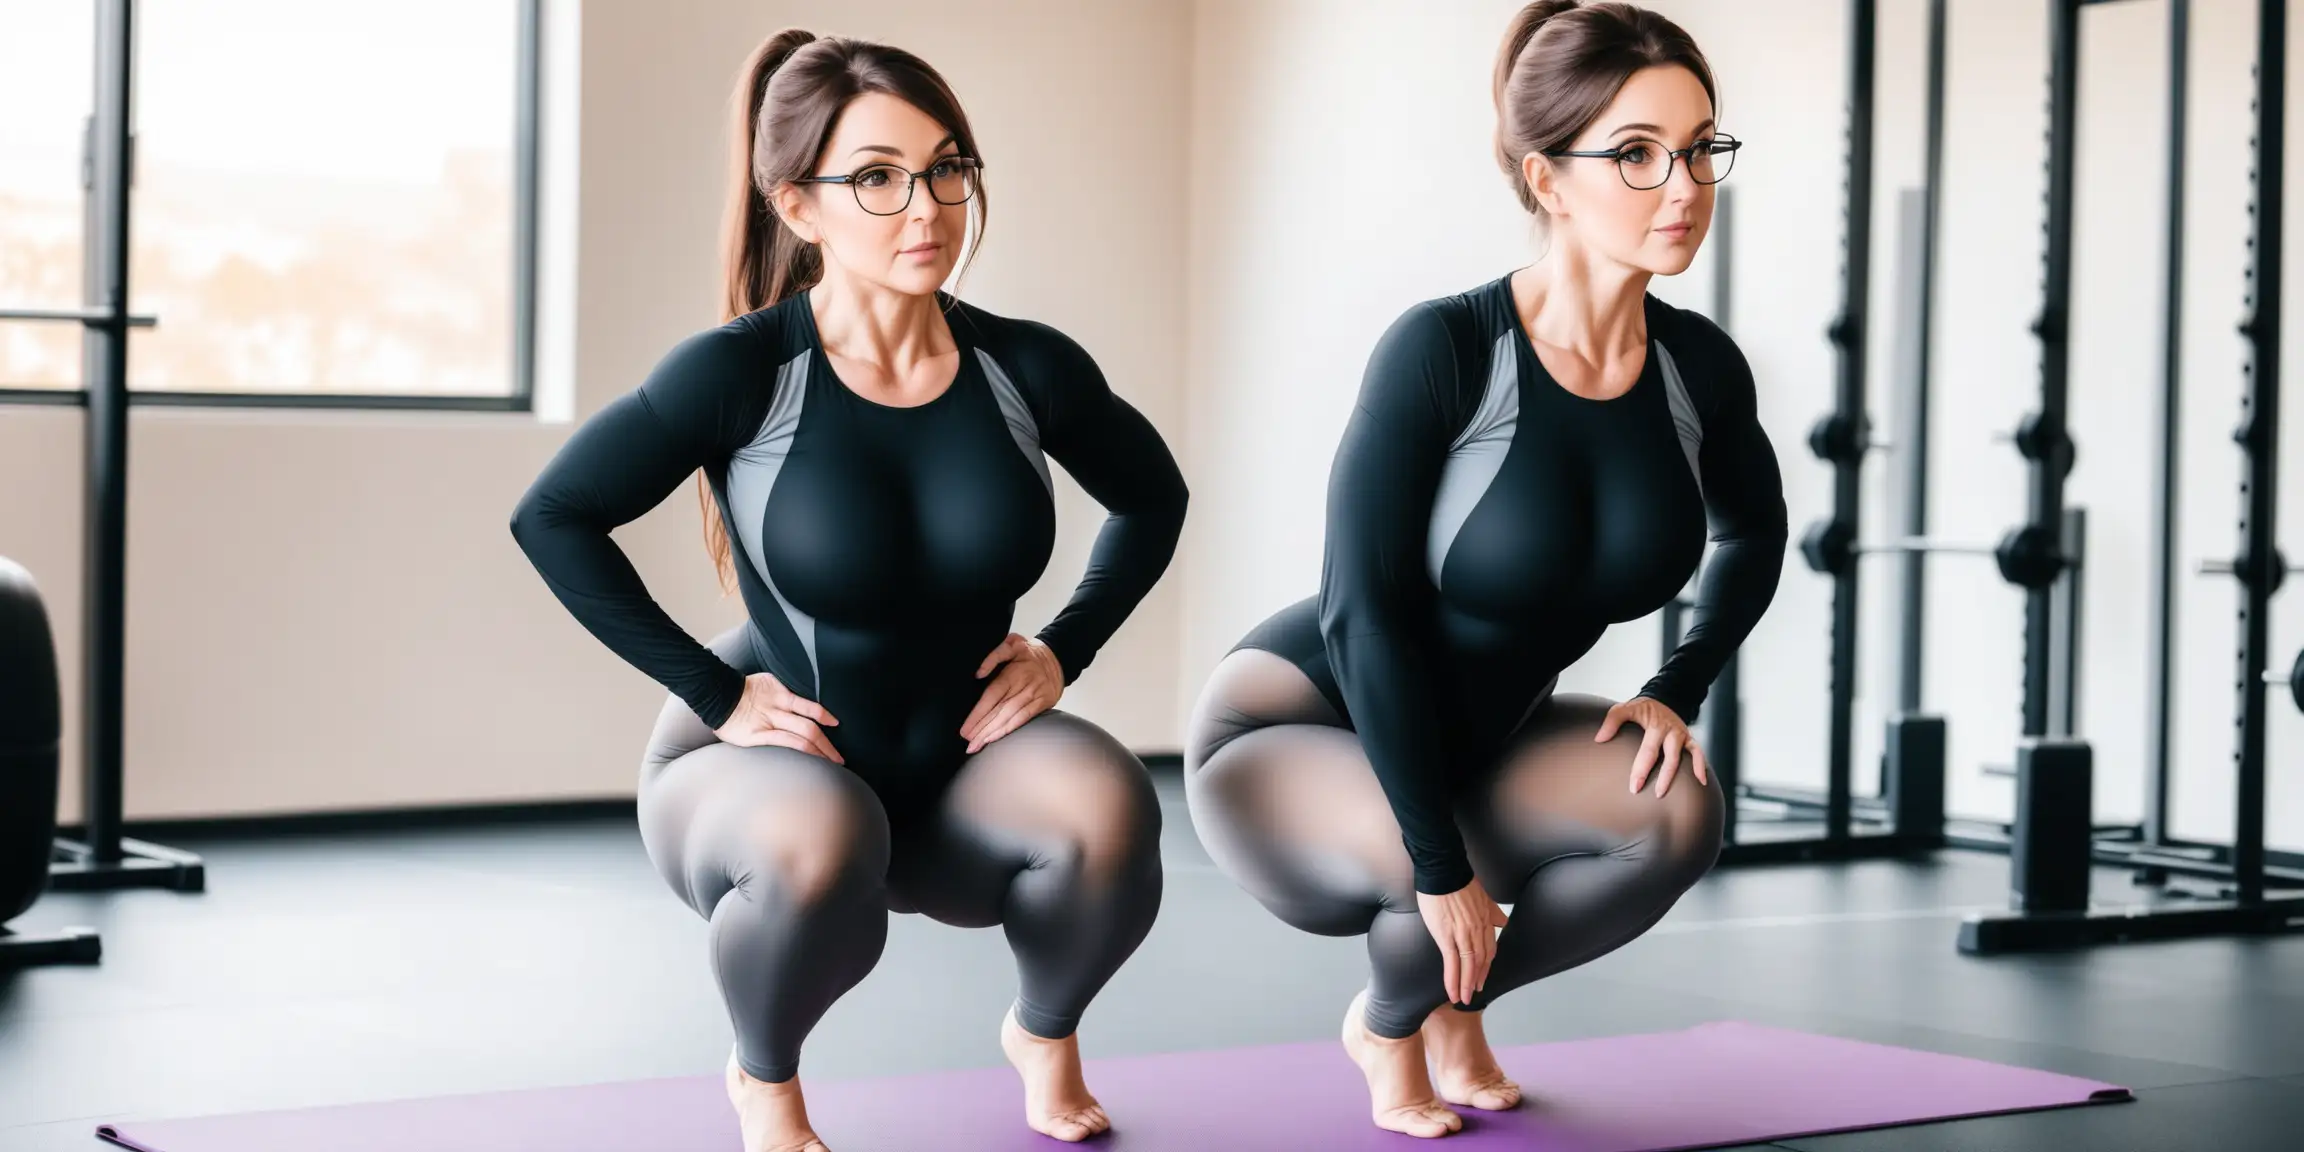 Curvy, Mature, Brunette, Glasses, wearing a Black Full Sleeve Leotard, Gray Pantyhose, Hands on Hips, exercises, bending her knees into a squatting position.